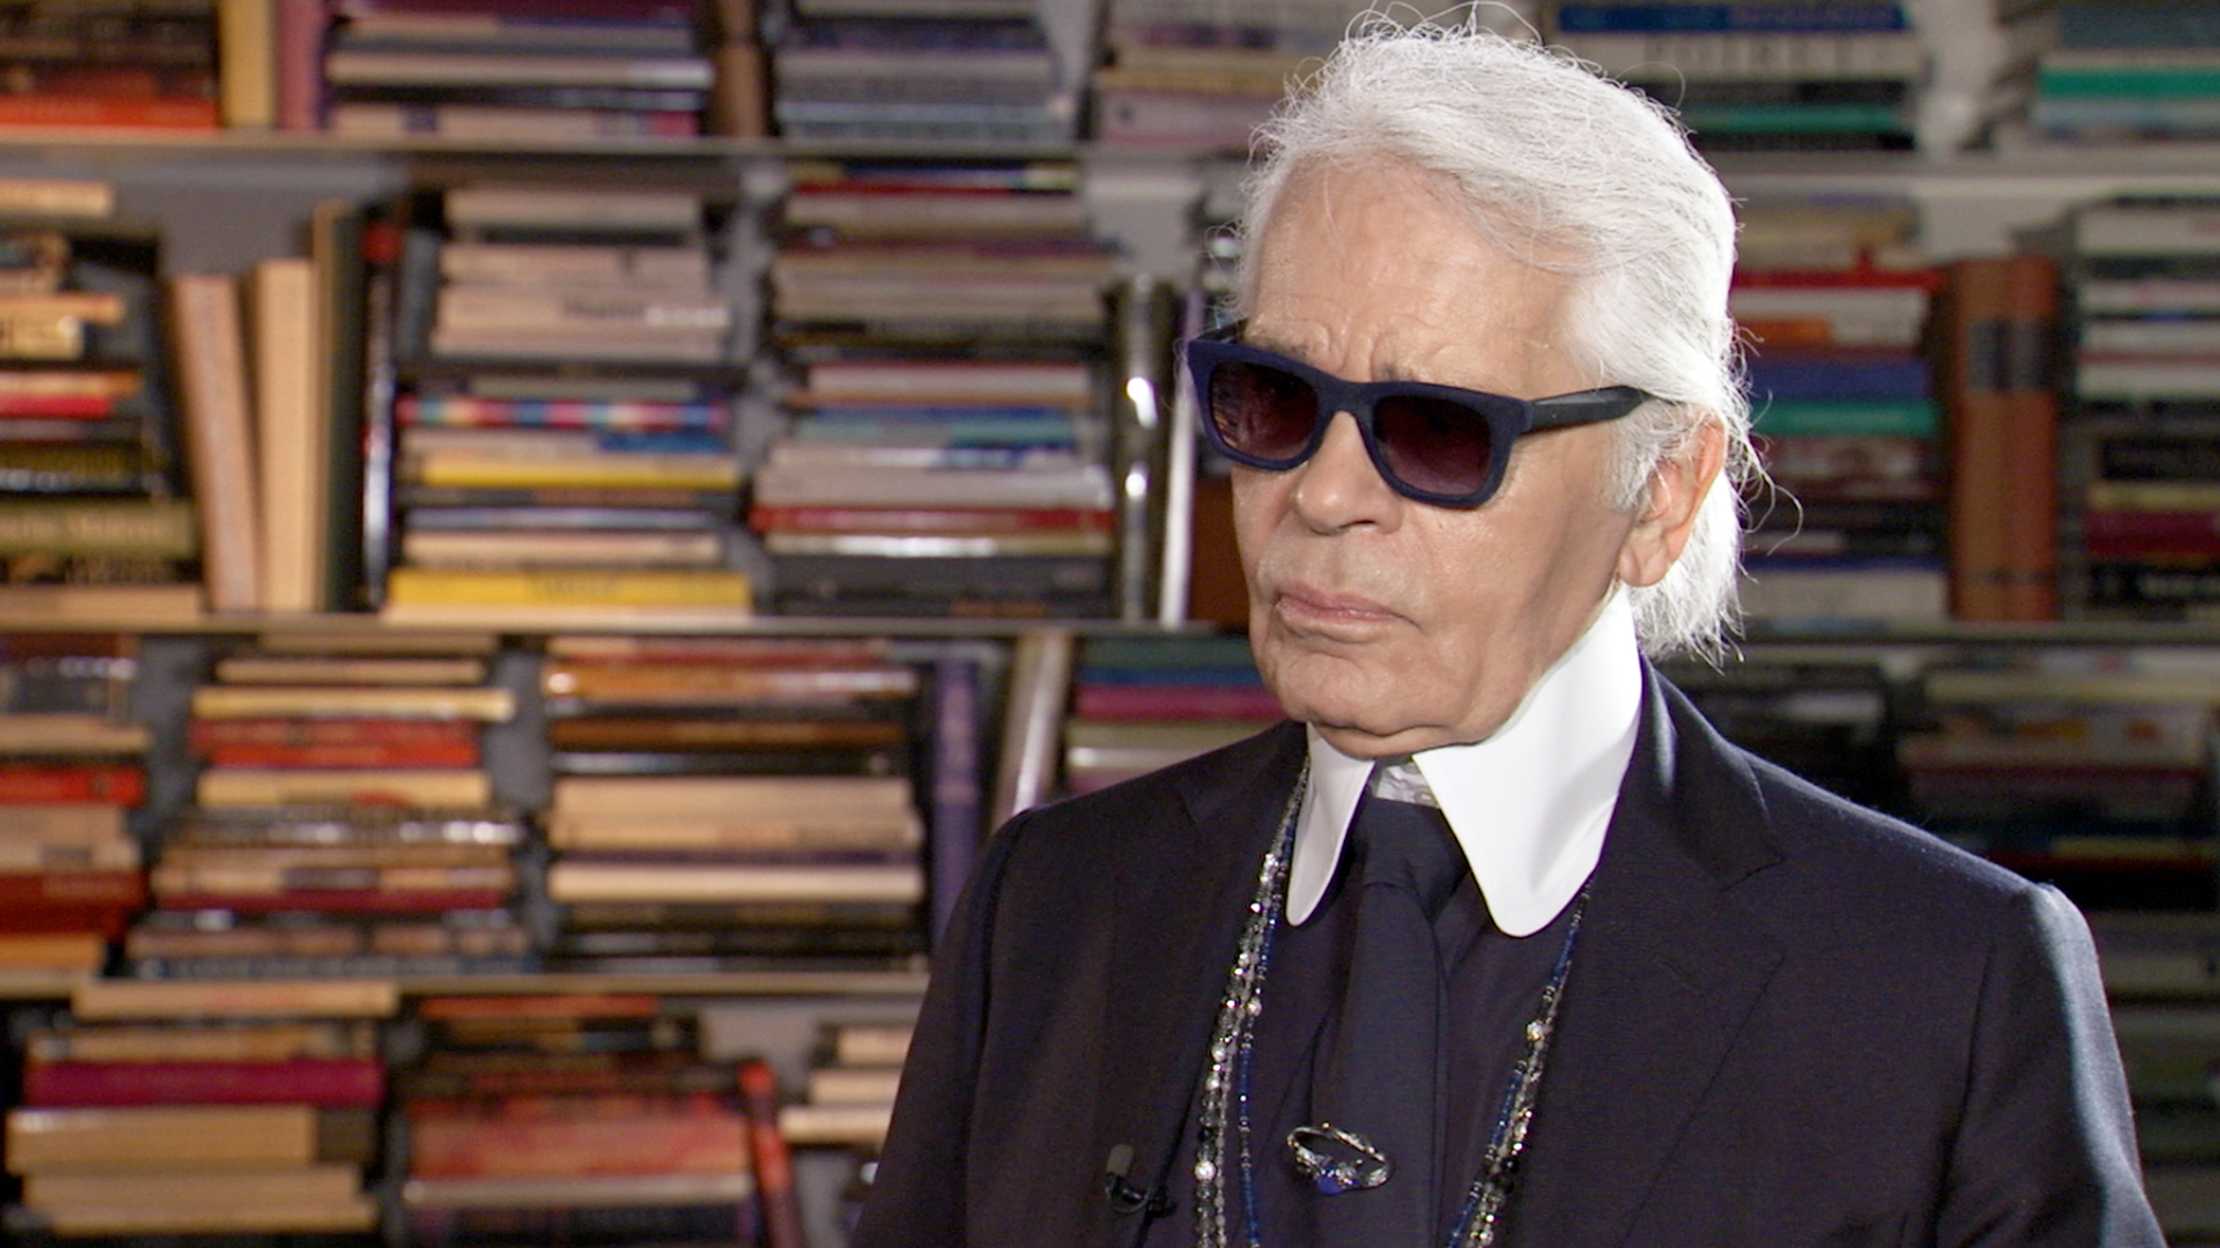 The Big Interview: Karl Lagerfeld - Film | Monocle